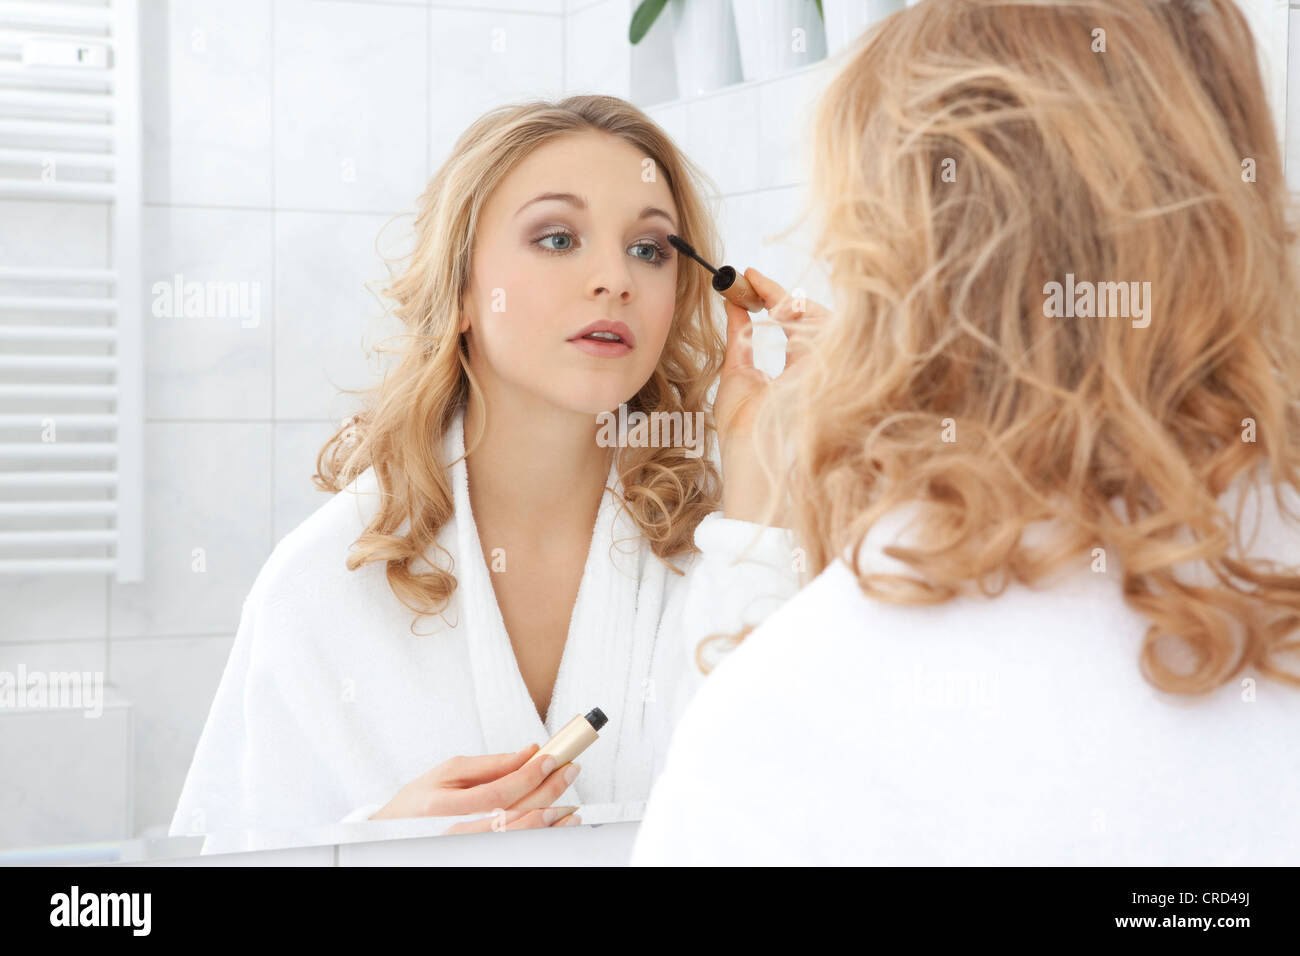 Young woman making up Stock Photo